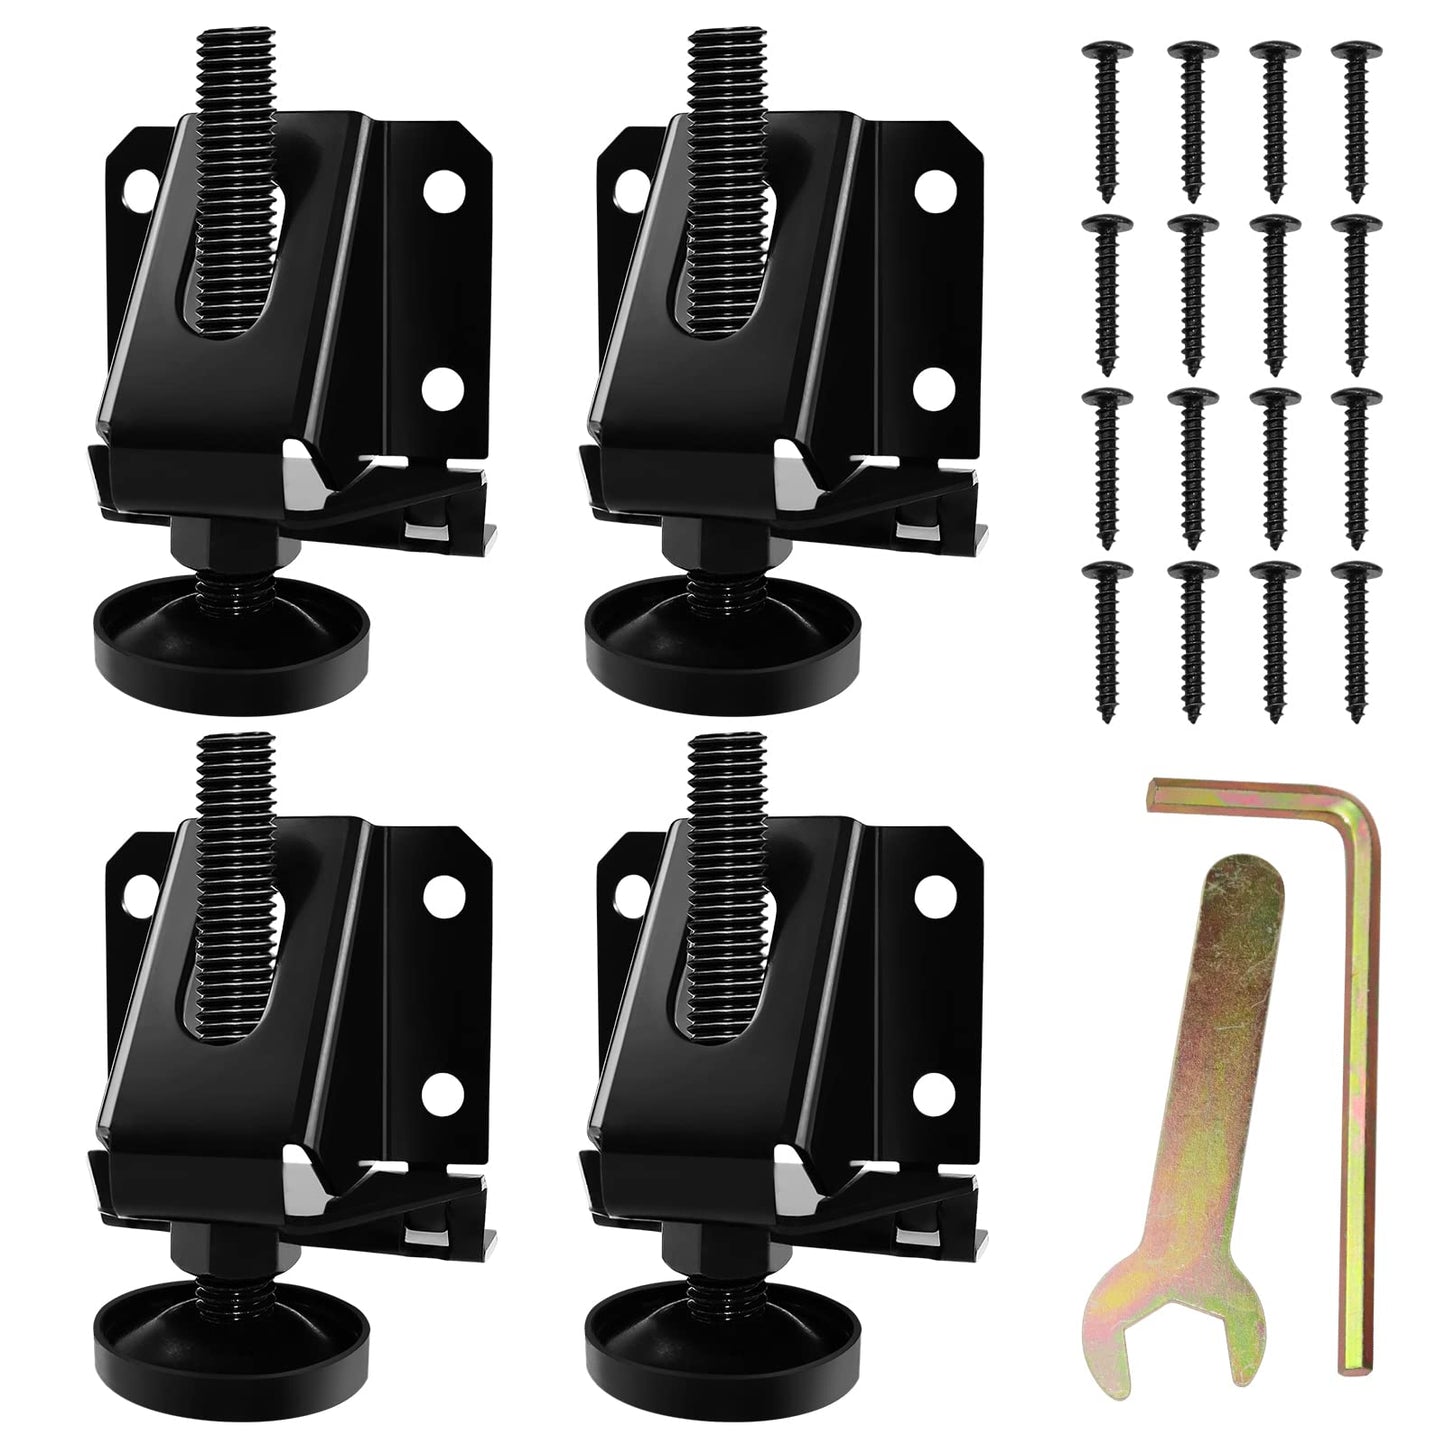 LOSCHEN 4 PCS Heavy Duty Adjustable Leveling Feet for Furniture,Hexagon Nuts Lock Furniture Legs Levelers,for Table, Cabinets, Workbench,Shelving